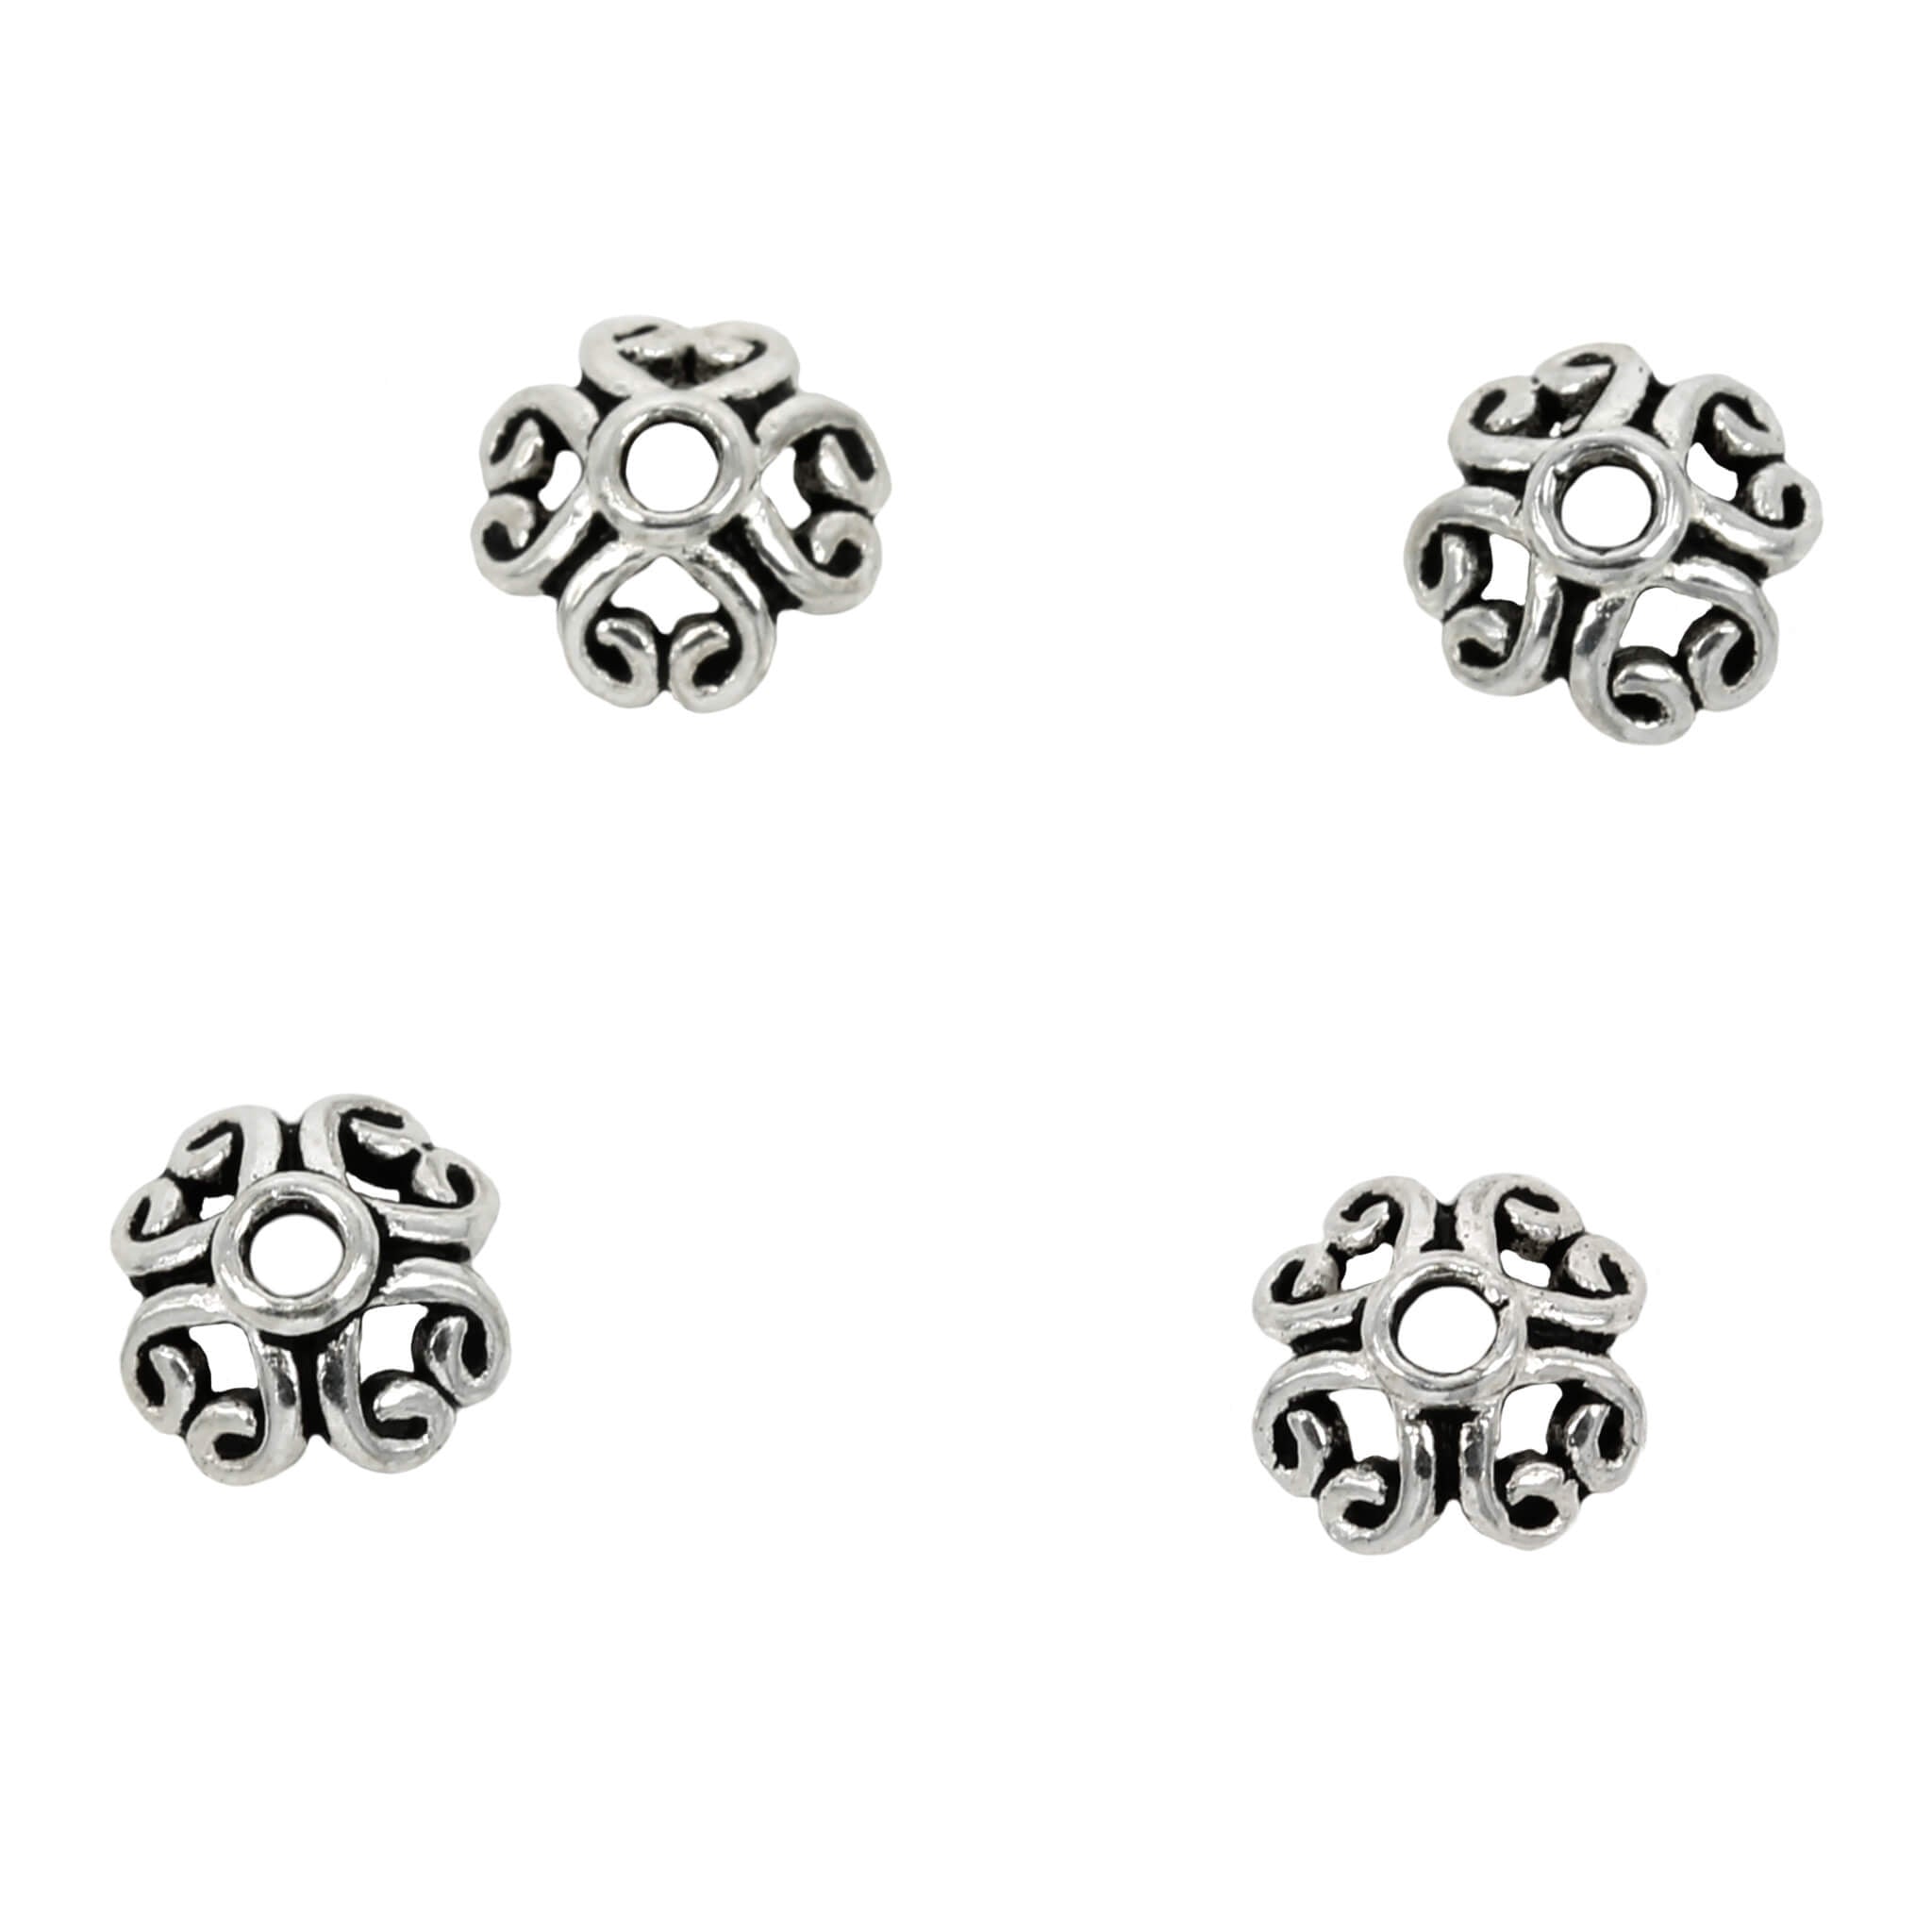 Open Curlicue Flourishes Bead Cap in Sterling Silver 7mm